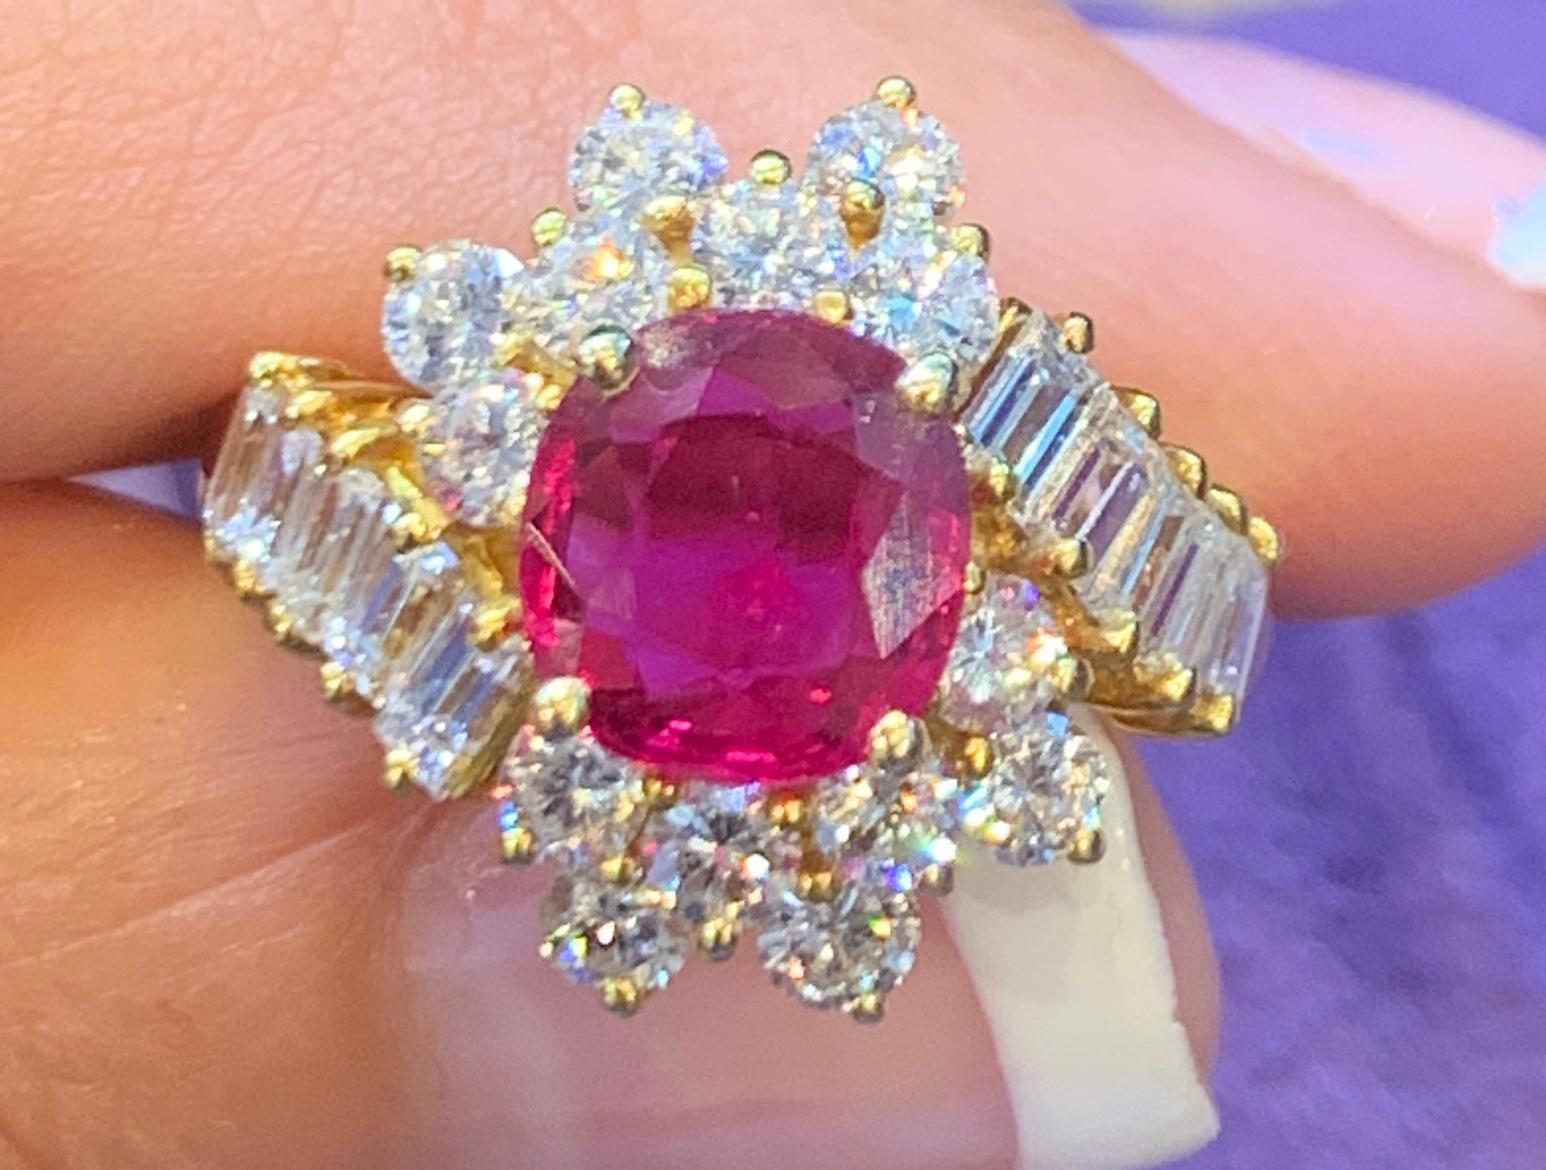 AGL Certified Ruby & Diamond Cocktail Ring, set in 18K Yellow Gold
Ruby Weight: 4.99 Cts
Diamond Weight: 1.20 Cts 
Ring Size: 6.75
Re-sizable Free of Charge 
